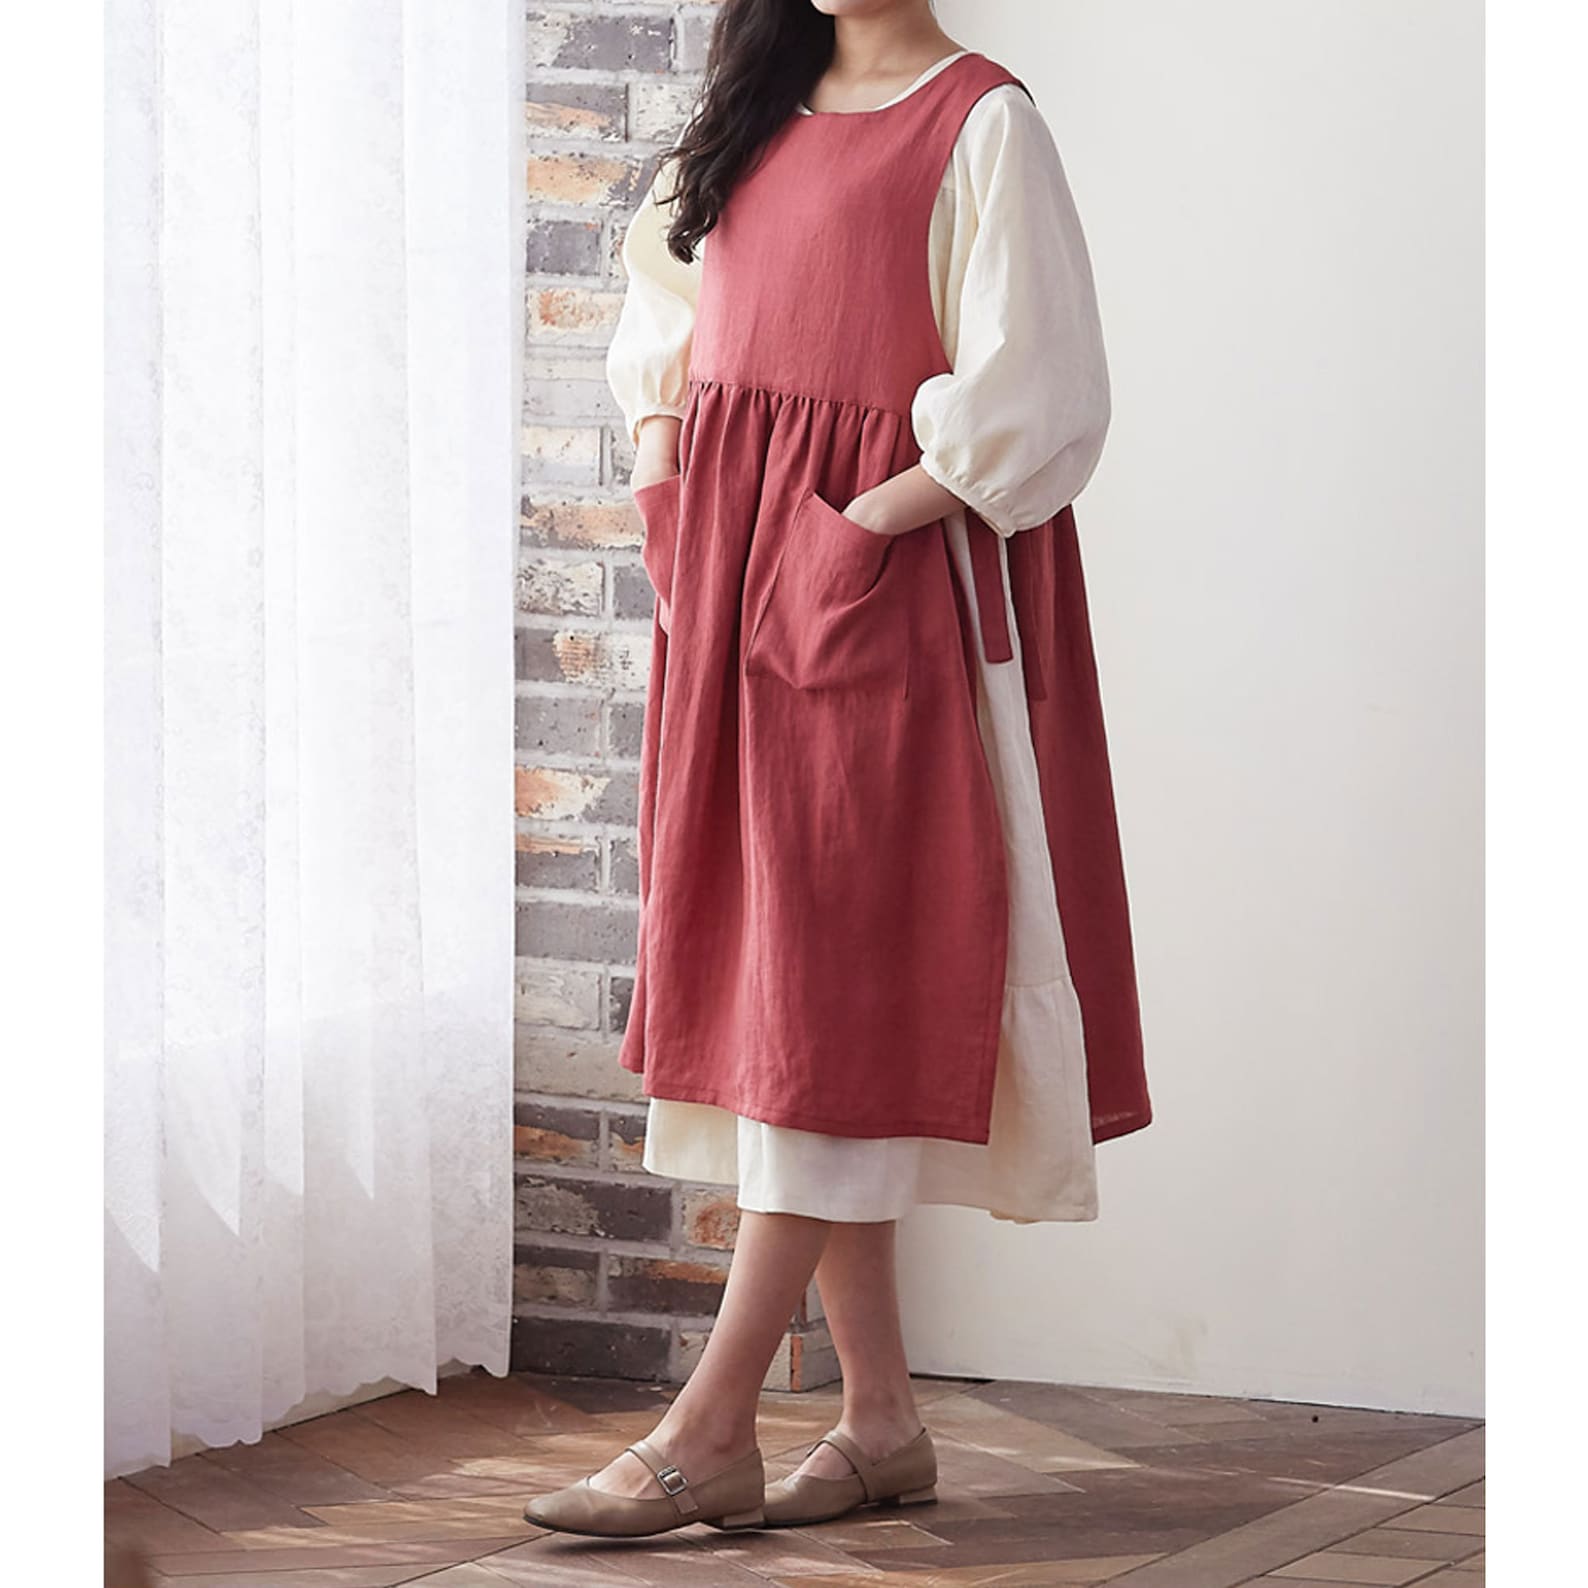 Pattern for Womansimple Layered Woman Dress Actual Size PDF - Etsy